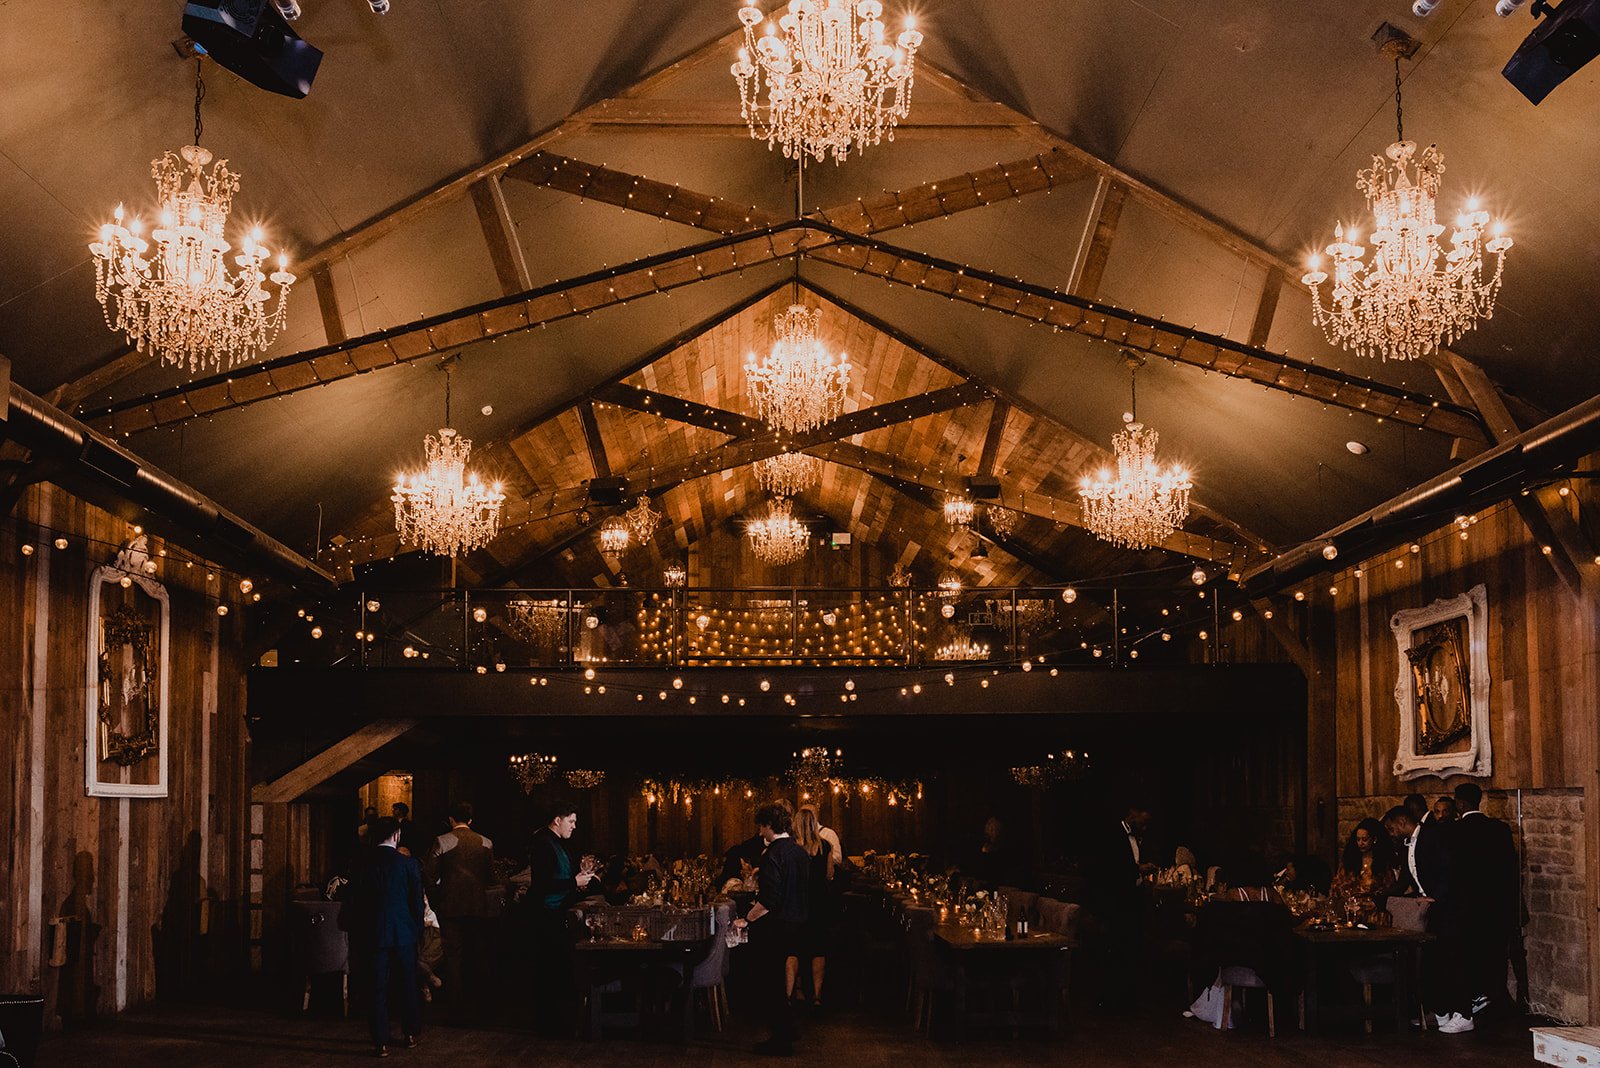 The chandeliers in the barn